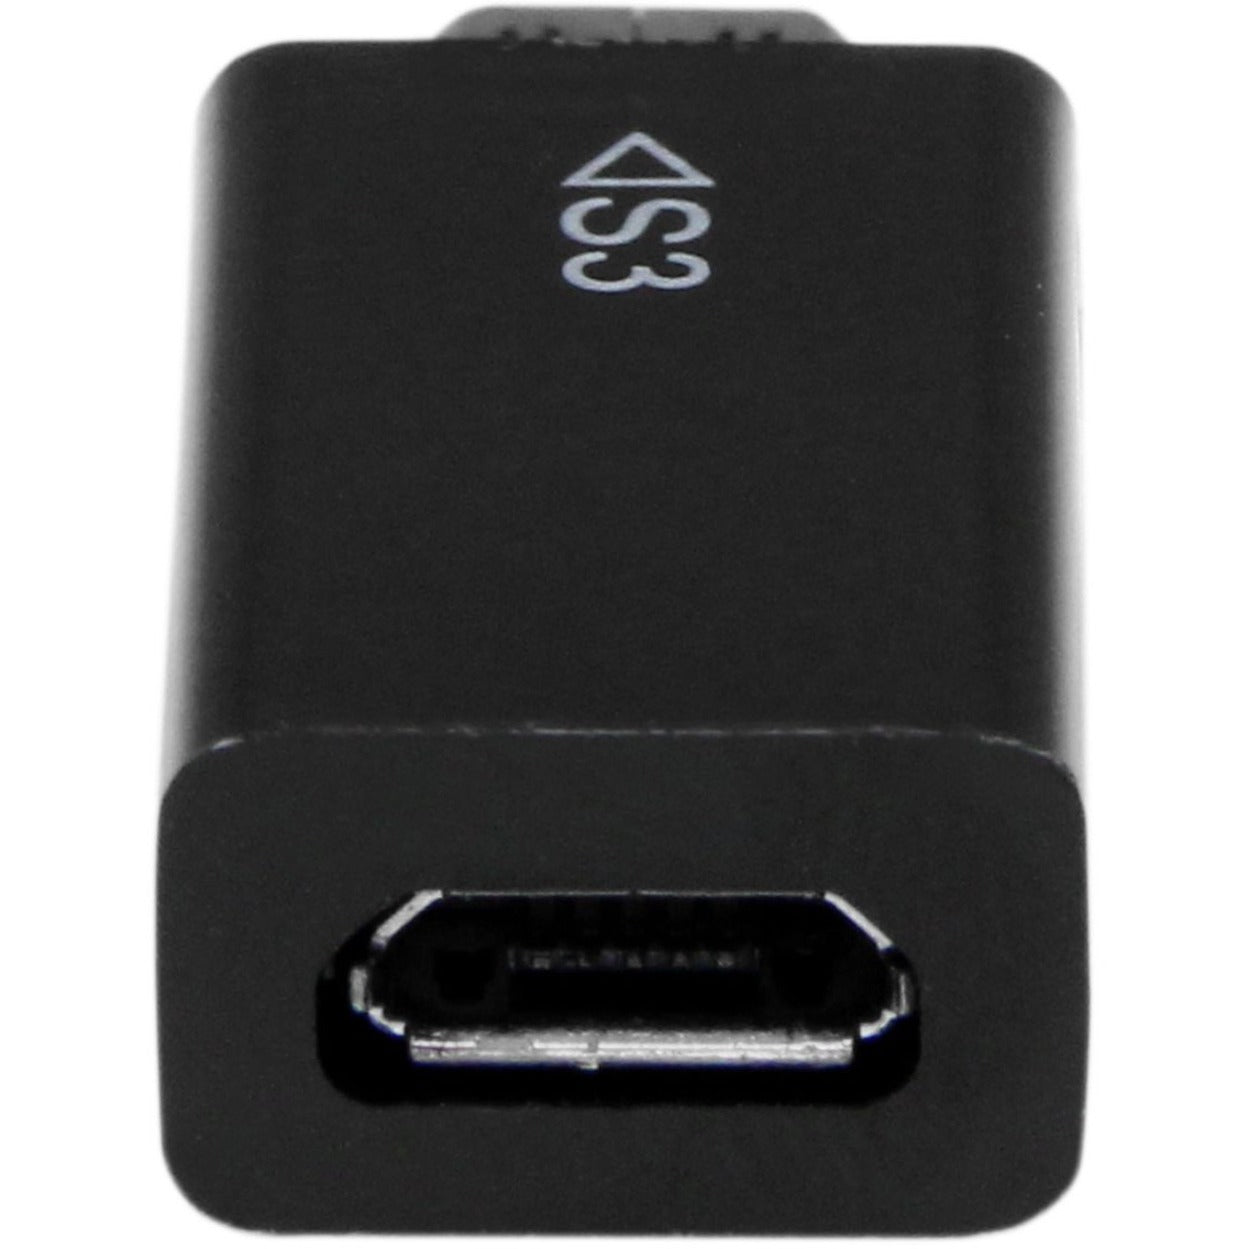 StarTech.com S3MHADAP Micro USB 5 pin to 11 pin MHL Adapter for Samsung, Easy Data Transfer for Galaxy S3, S2, Note 2